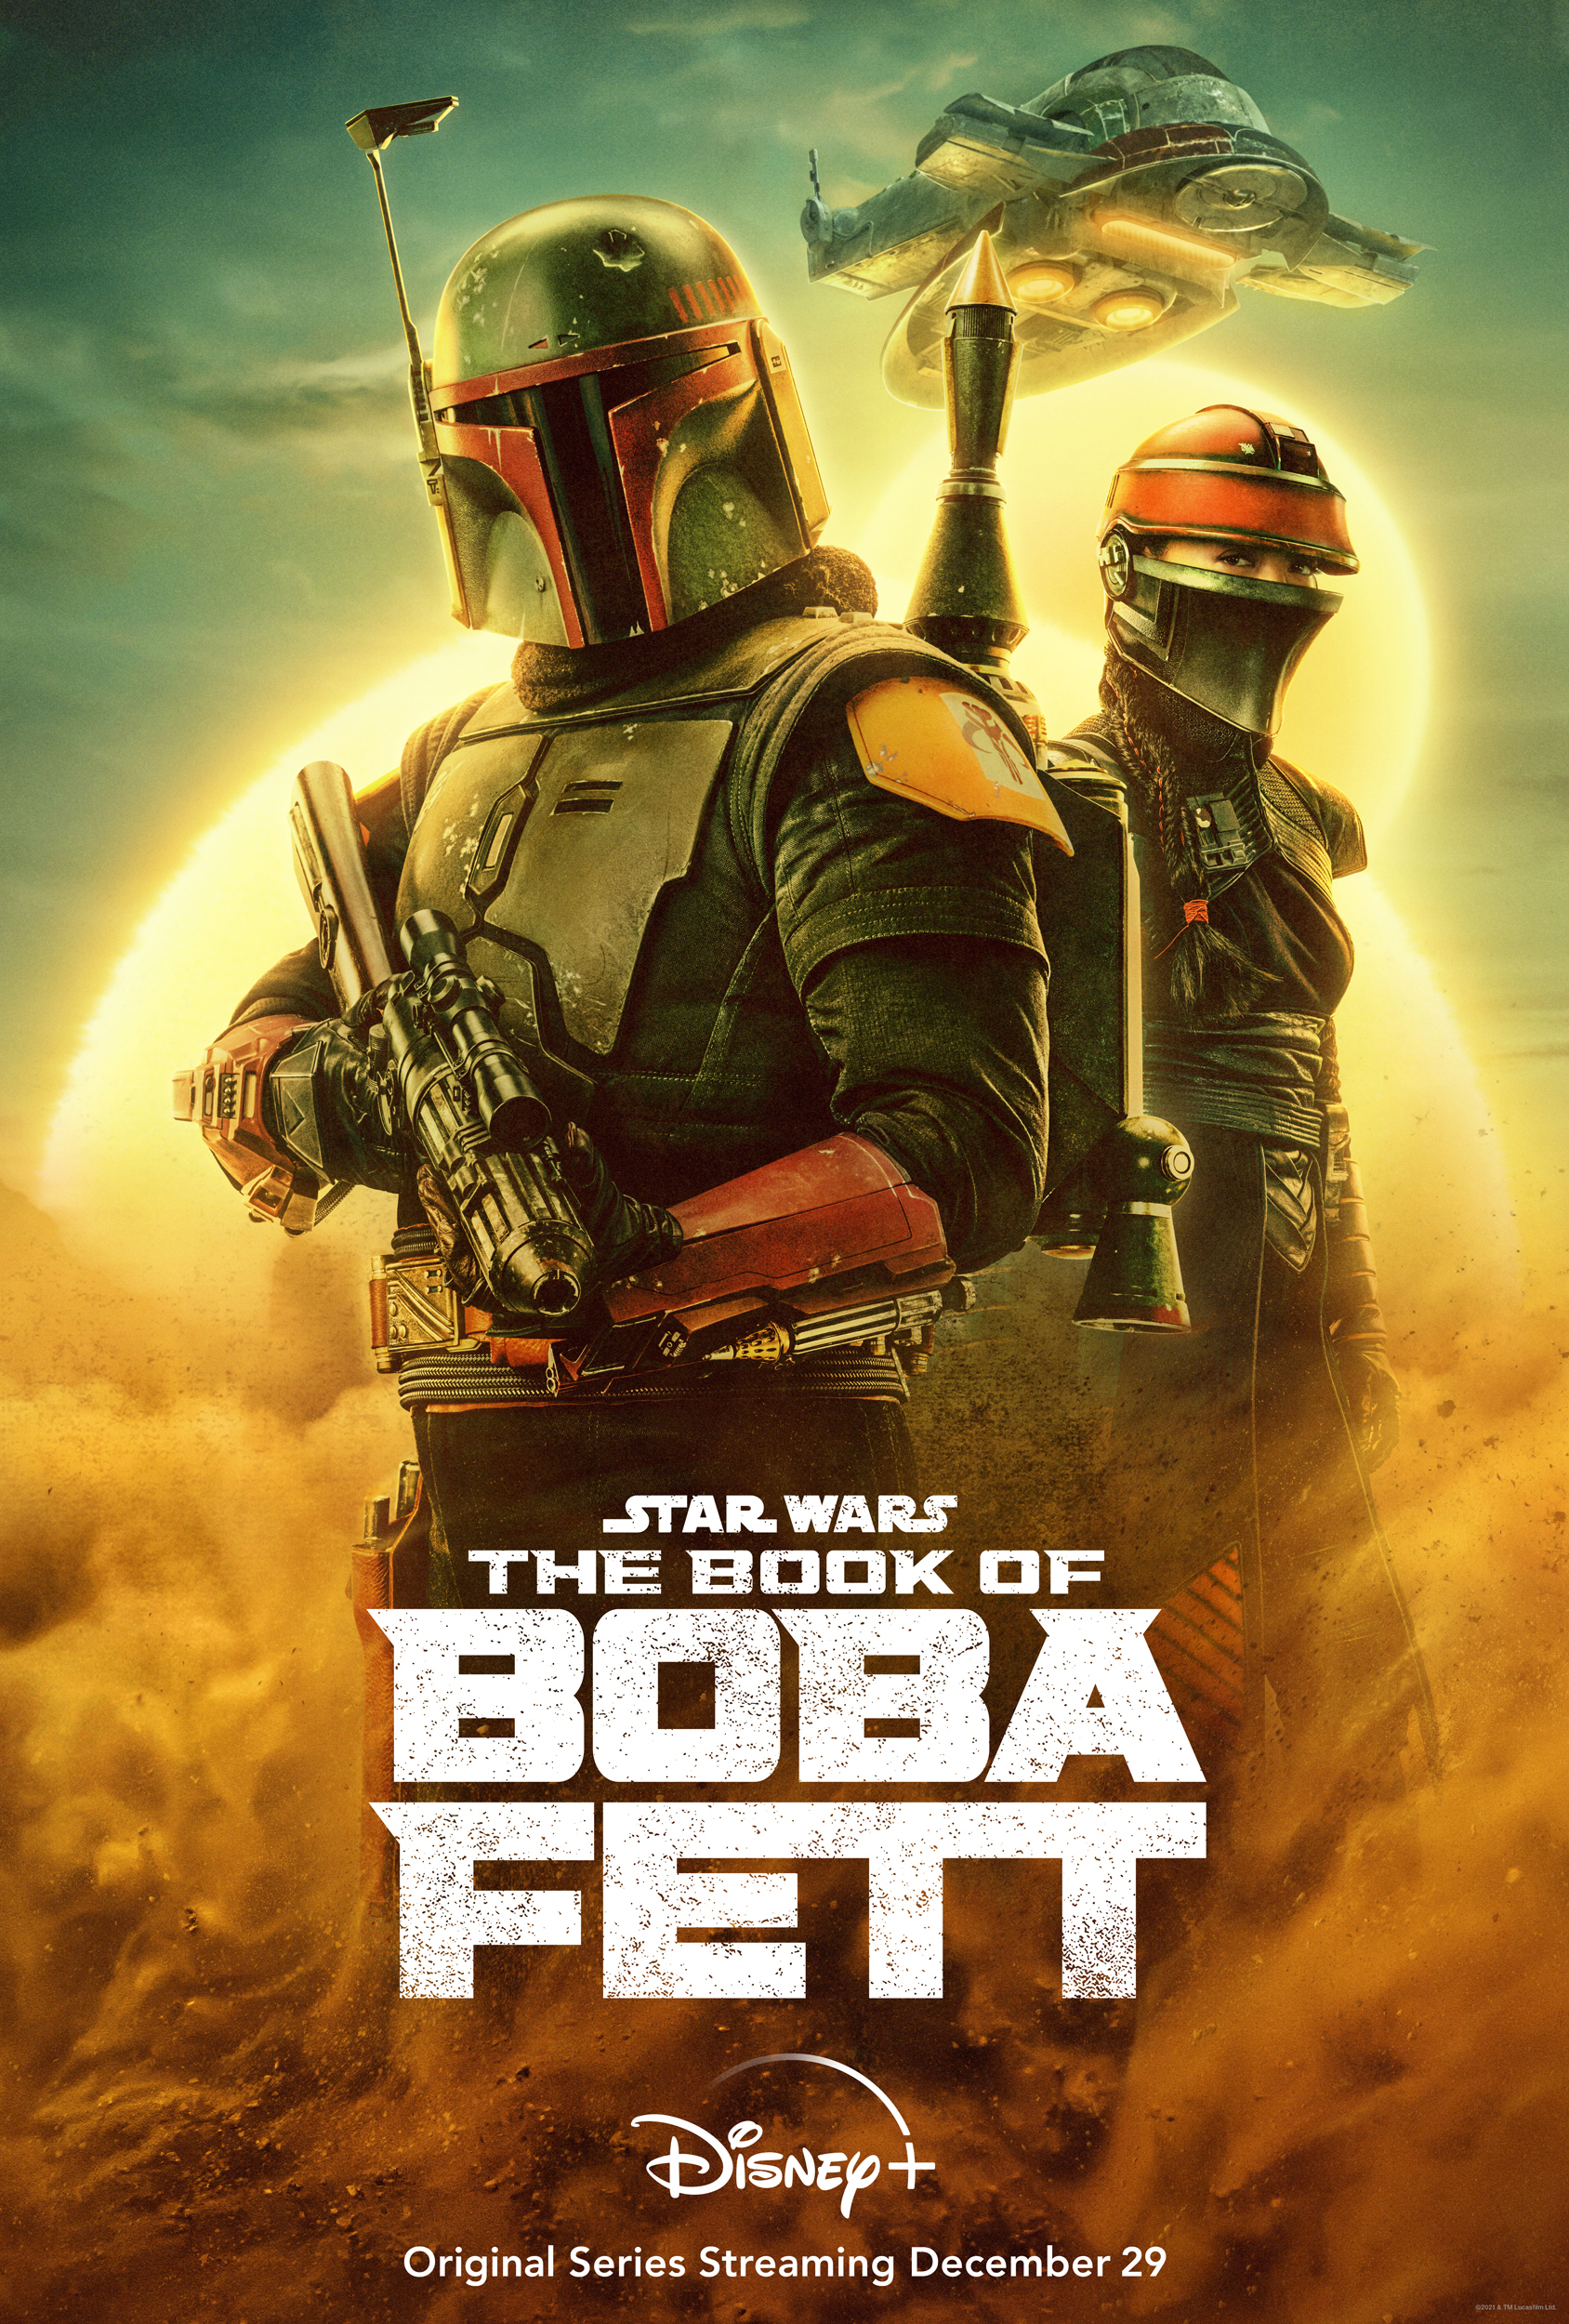 What is Star Wars: The Book of Boba Fett release date?